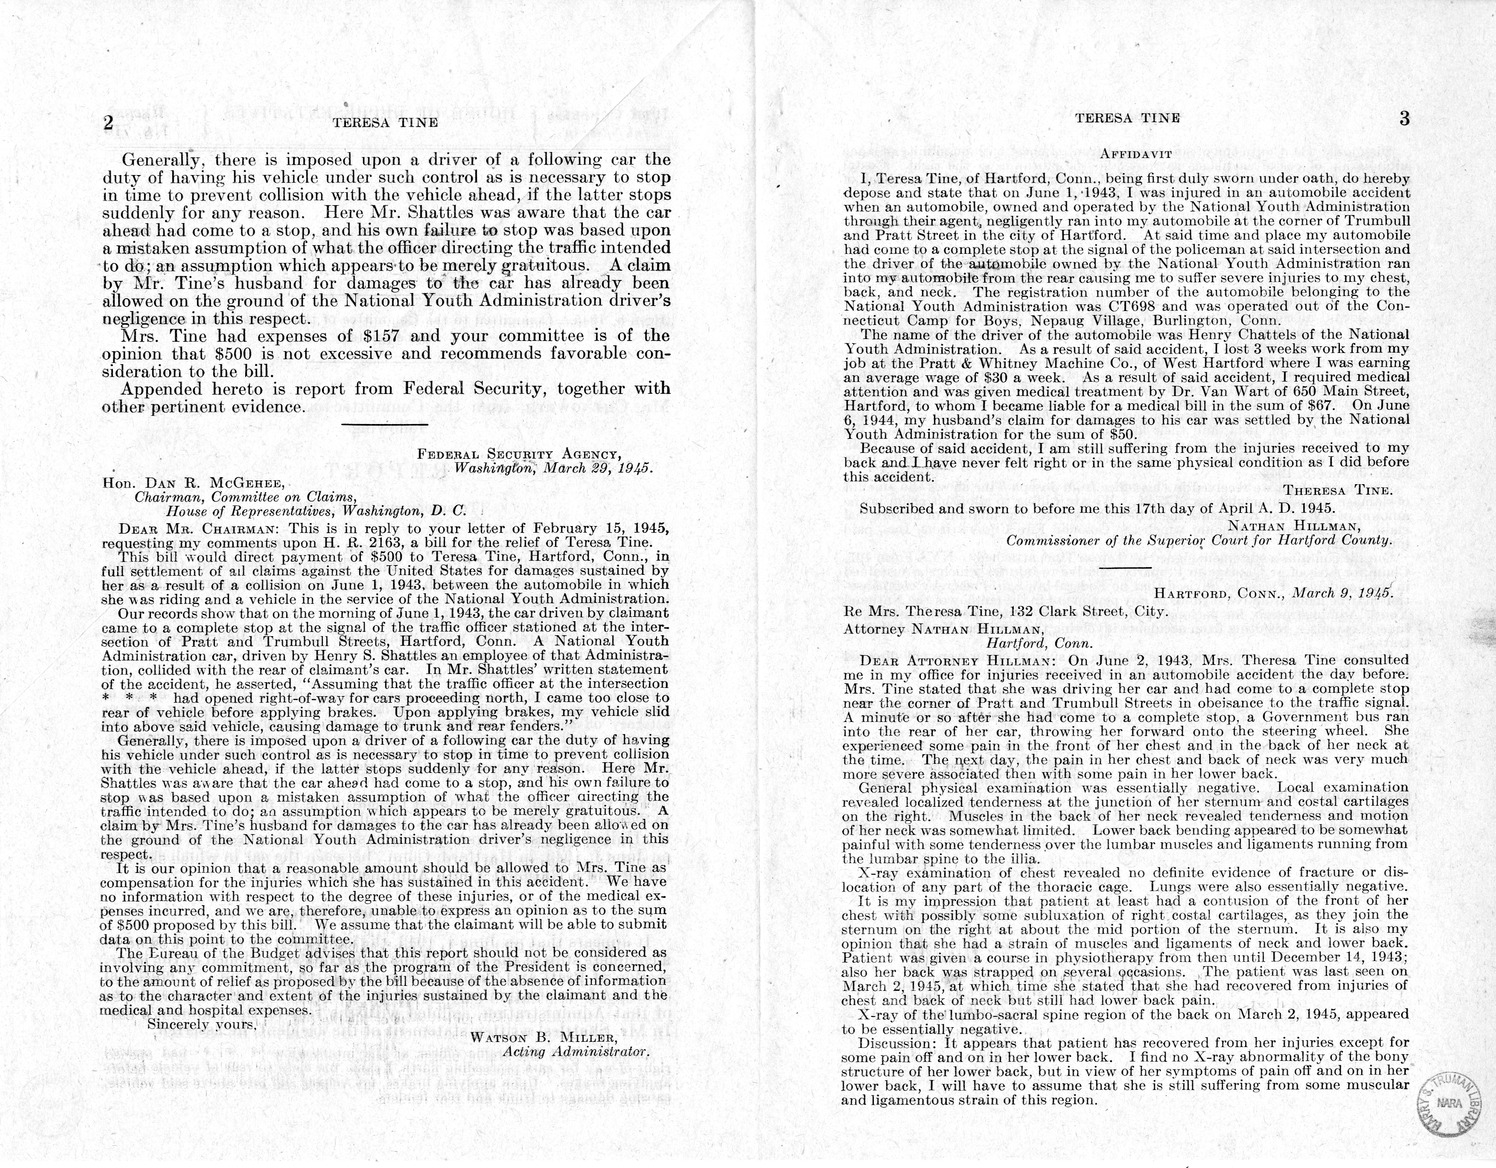 Memorandum from Frederick J. Bailey to M. C. Latta, H.R. 2163, for the Relief of Teresa Tine, with Attachments